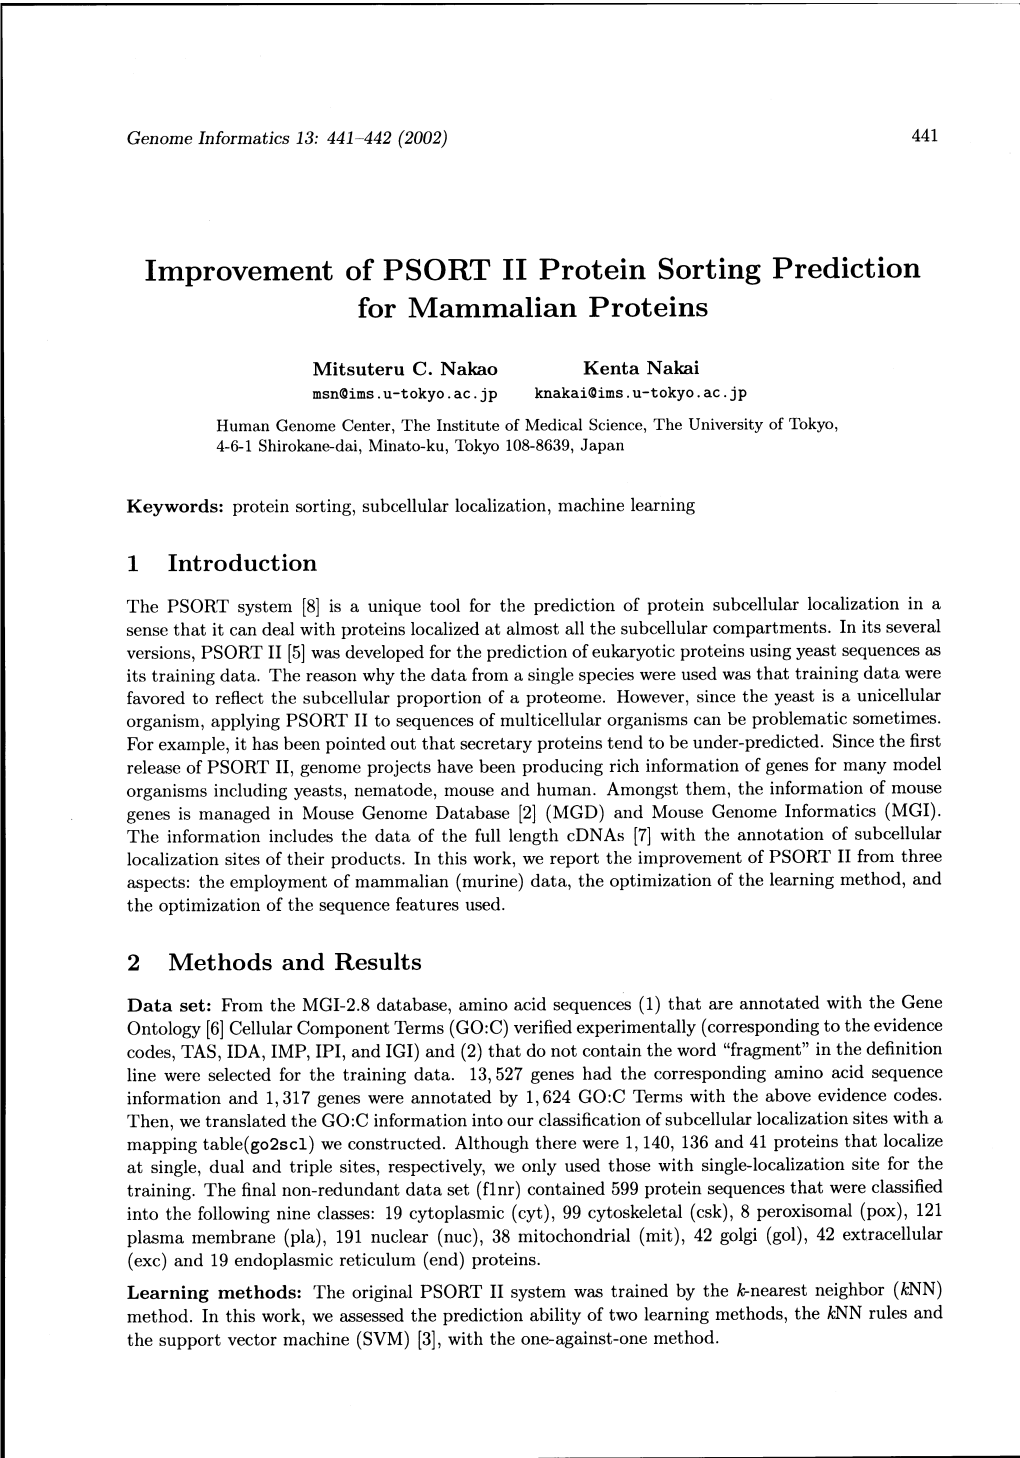 Improvement of PSORT II Protein Sorting Prediction for Mammalian Proteins